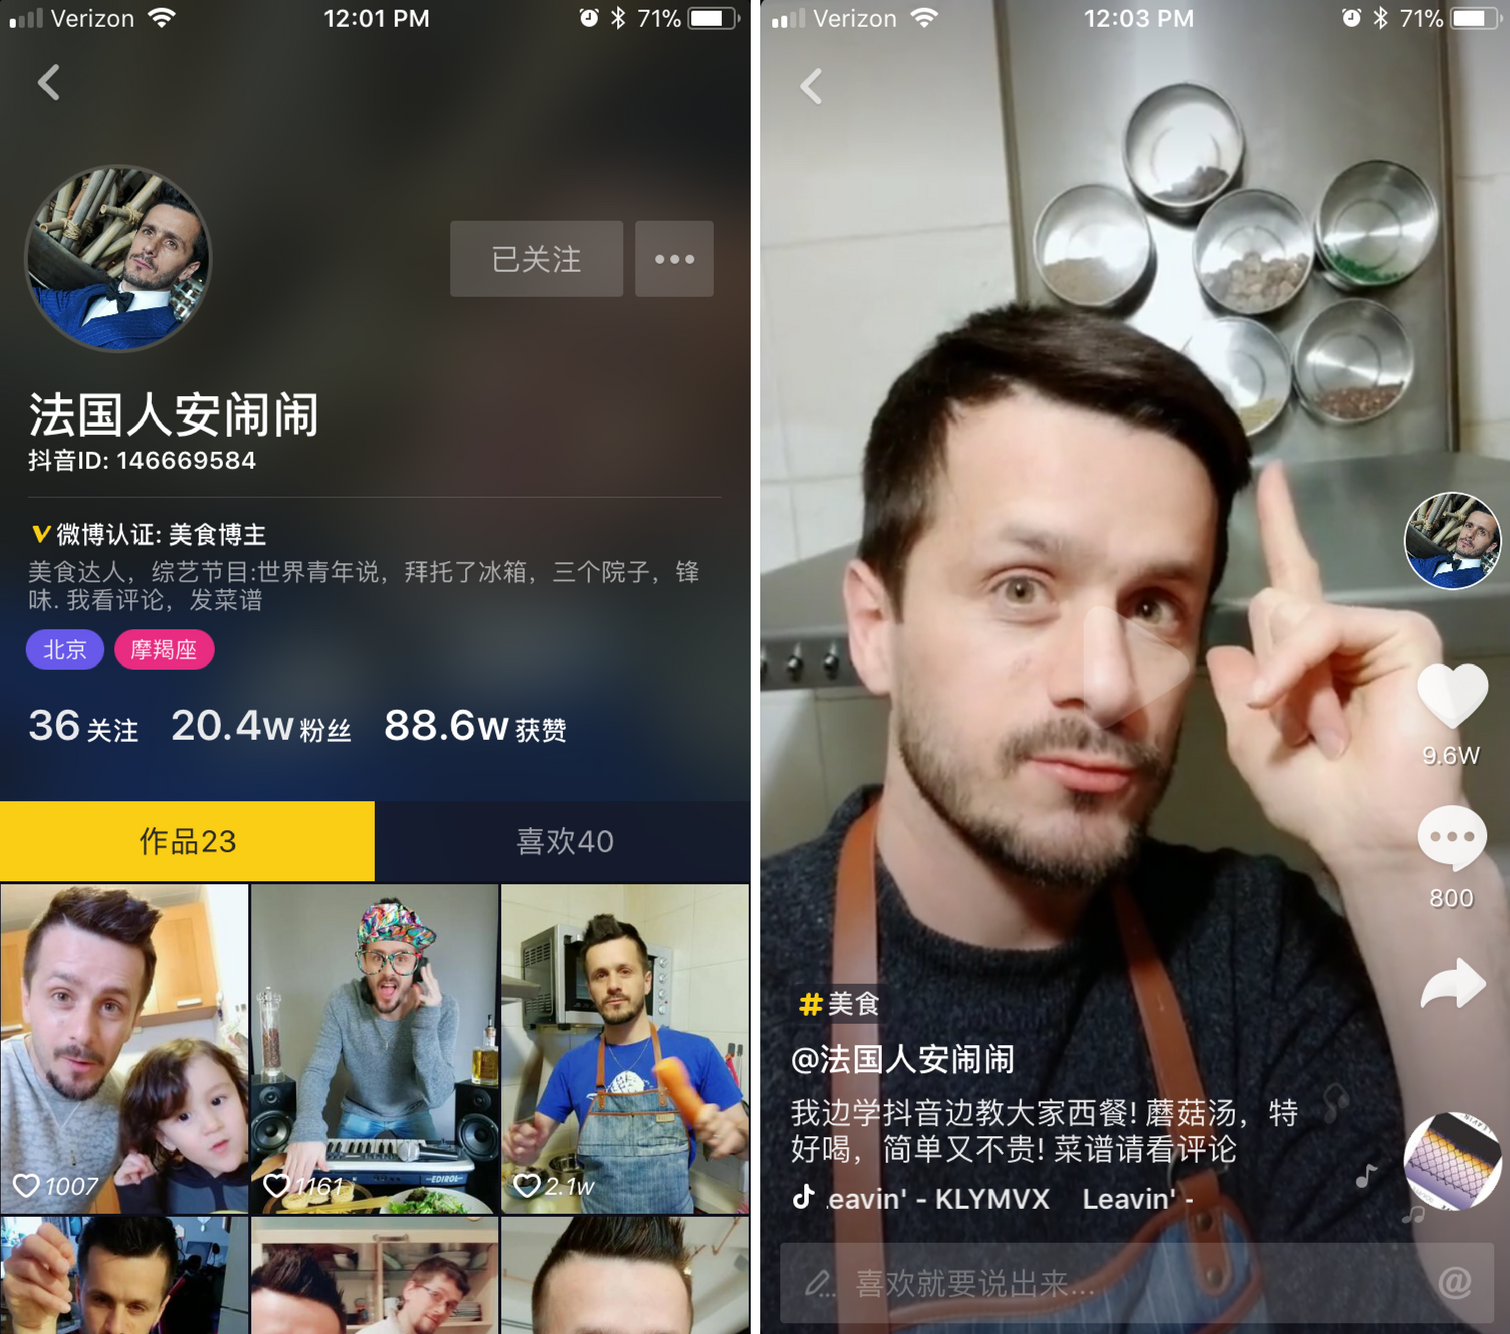 Meipai Shut Down Drives Influencers to Douyin in Droves